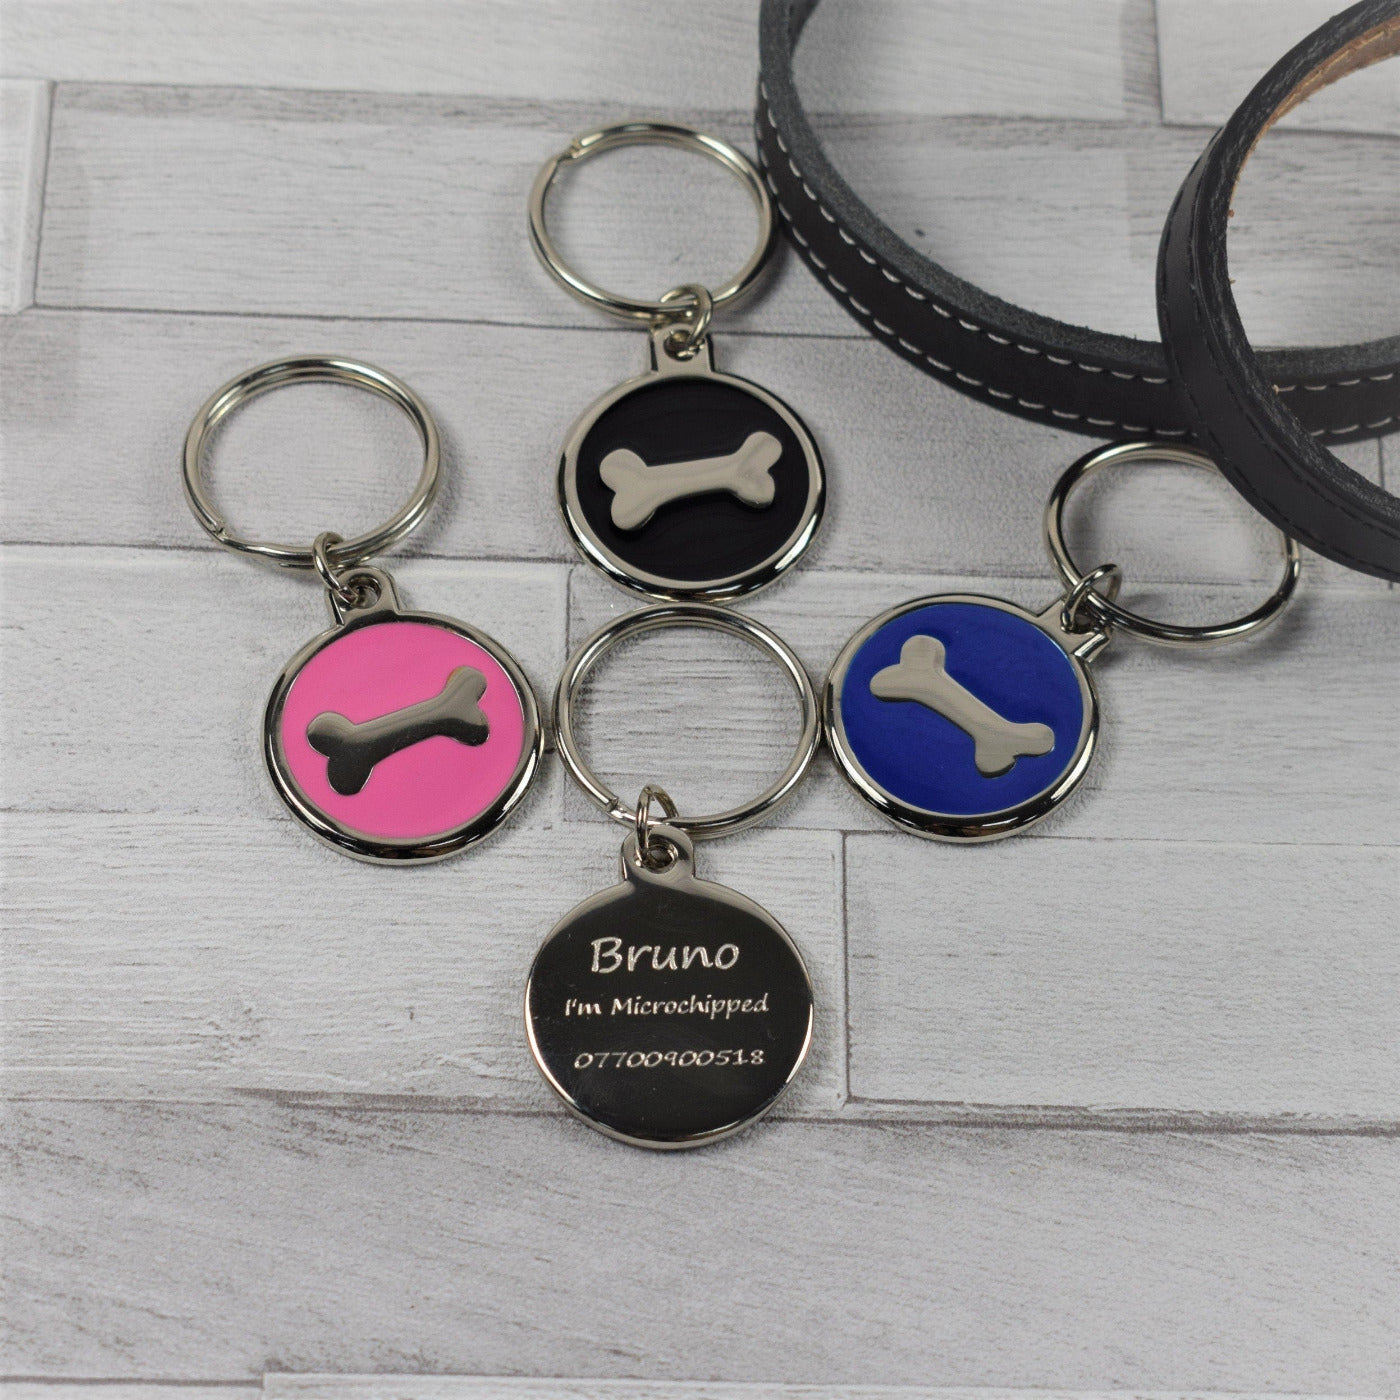 Personalised Round Pet ID Tag With Bone - Collar Tag For Dogs & Cats